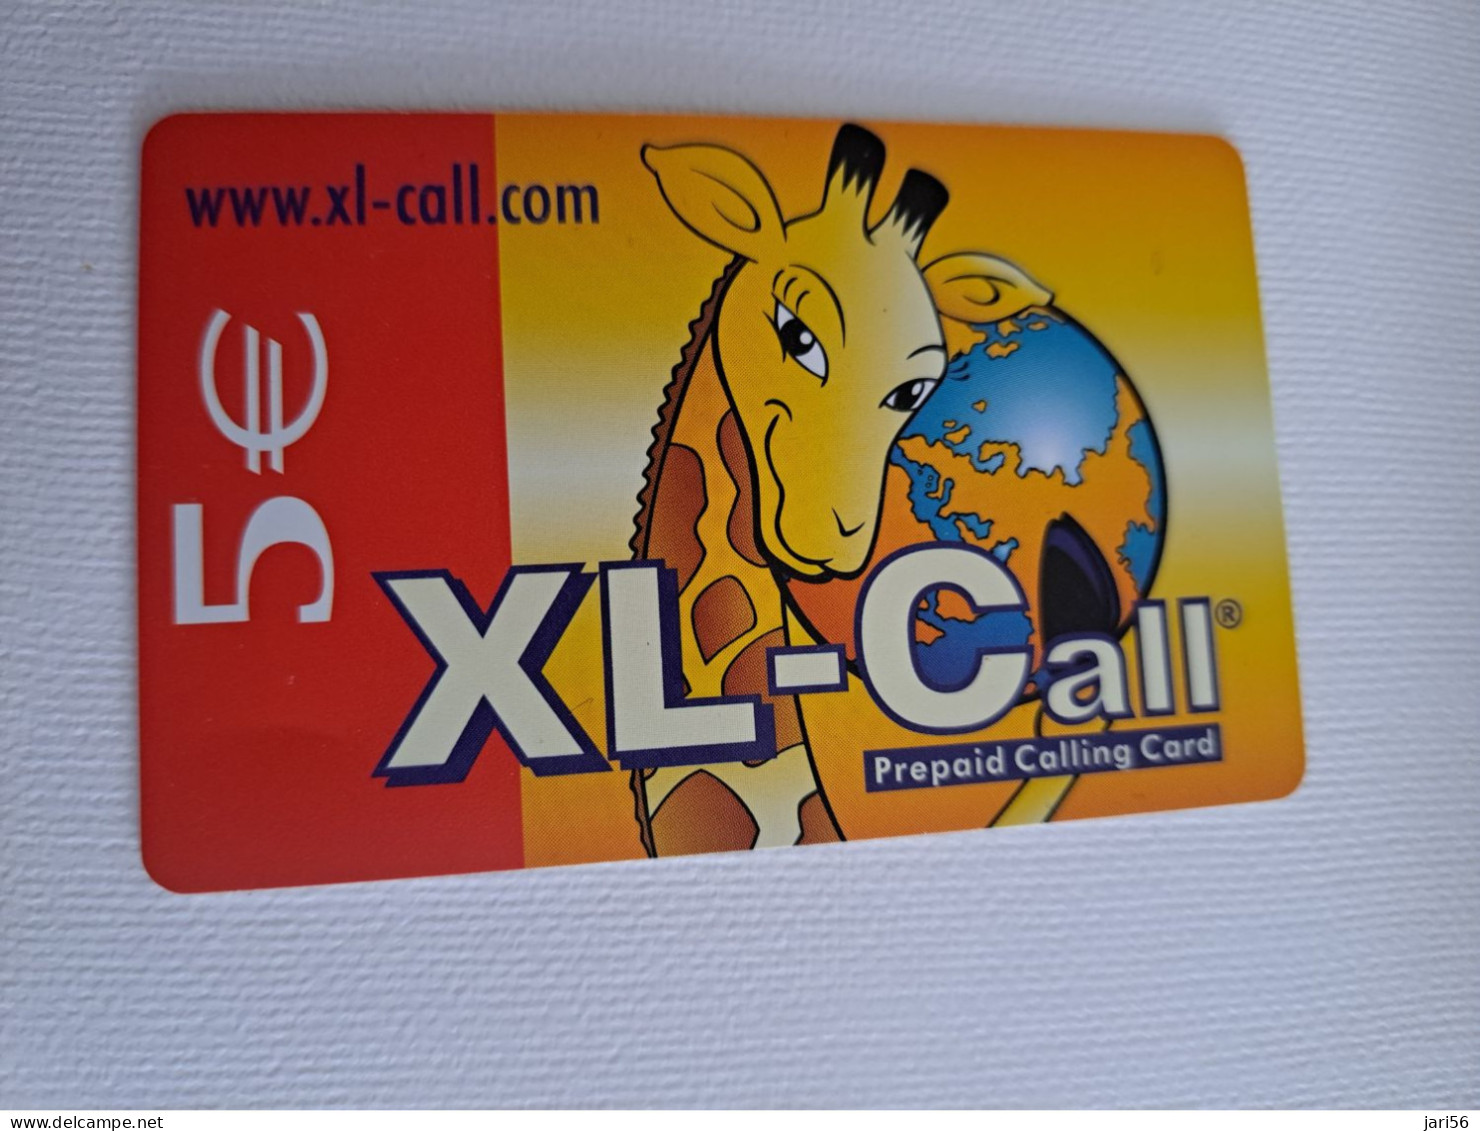 NETHERLANDS / PREPAID /€ 5,-,- / XL CALL/ GIRAFFE/ WITH GLOBE      /    - USED CARD  ** 15767** - Publiques